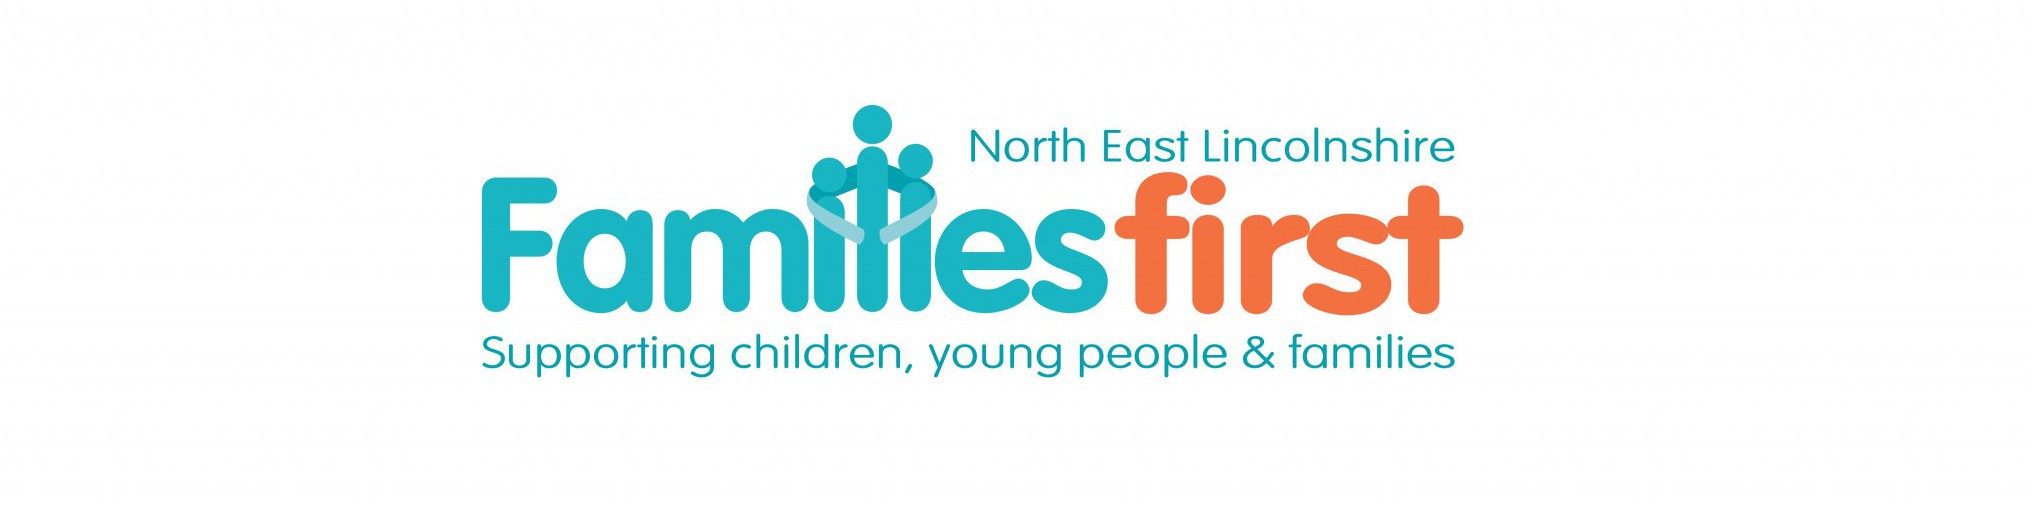 East Lincolnshire With Teens 66